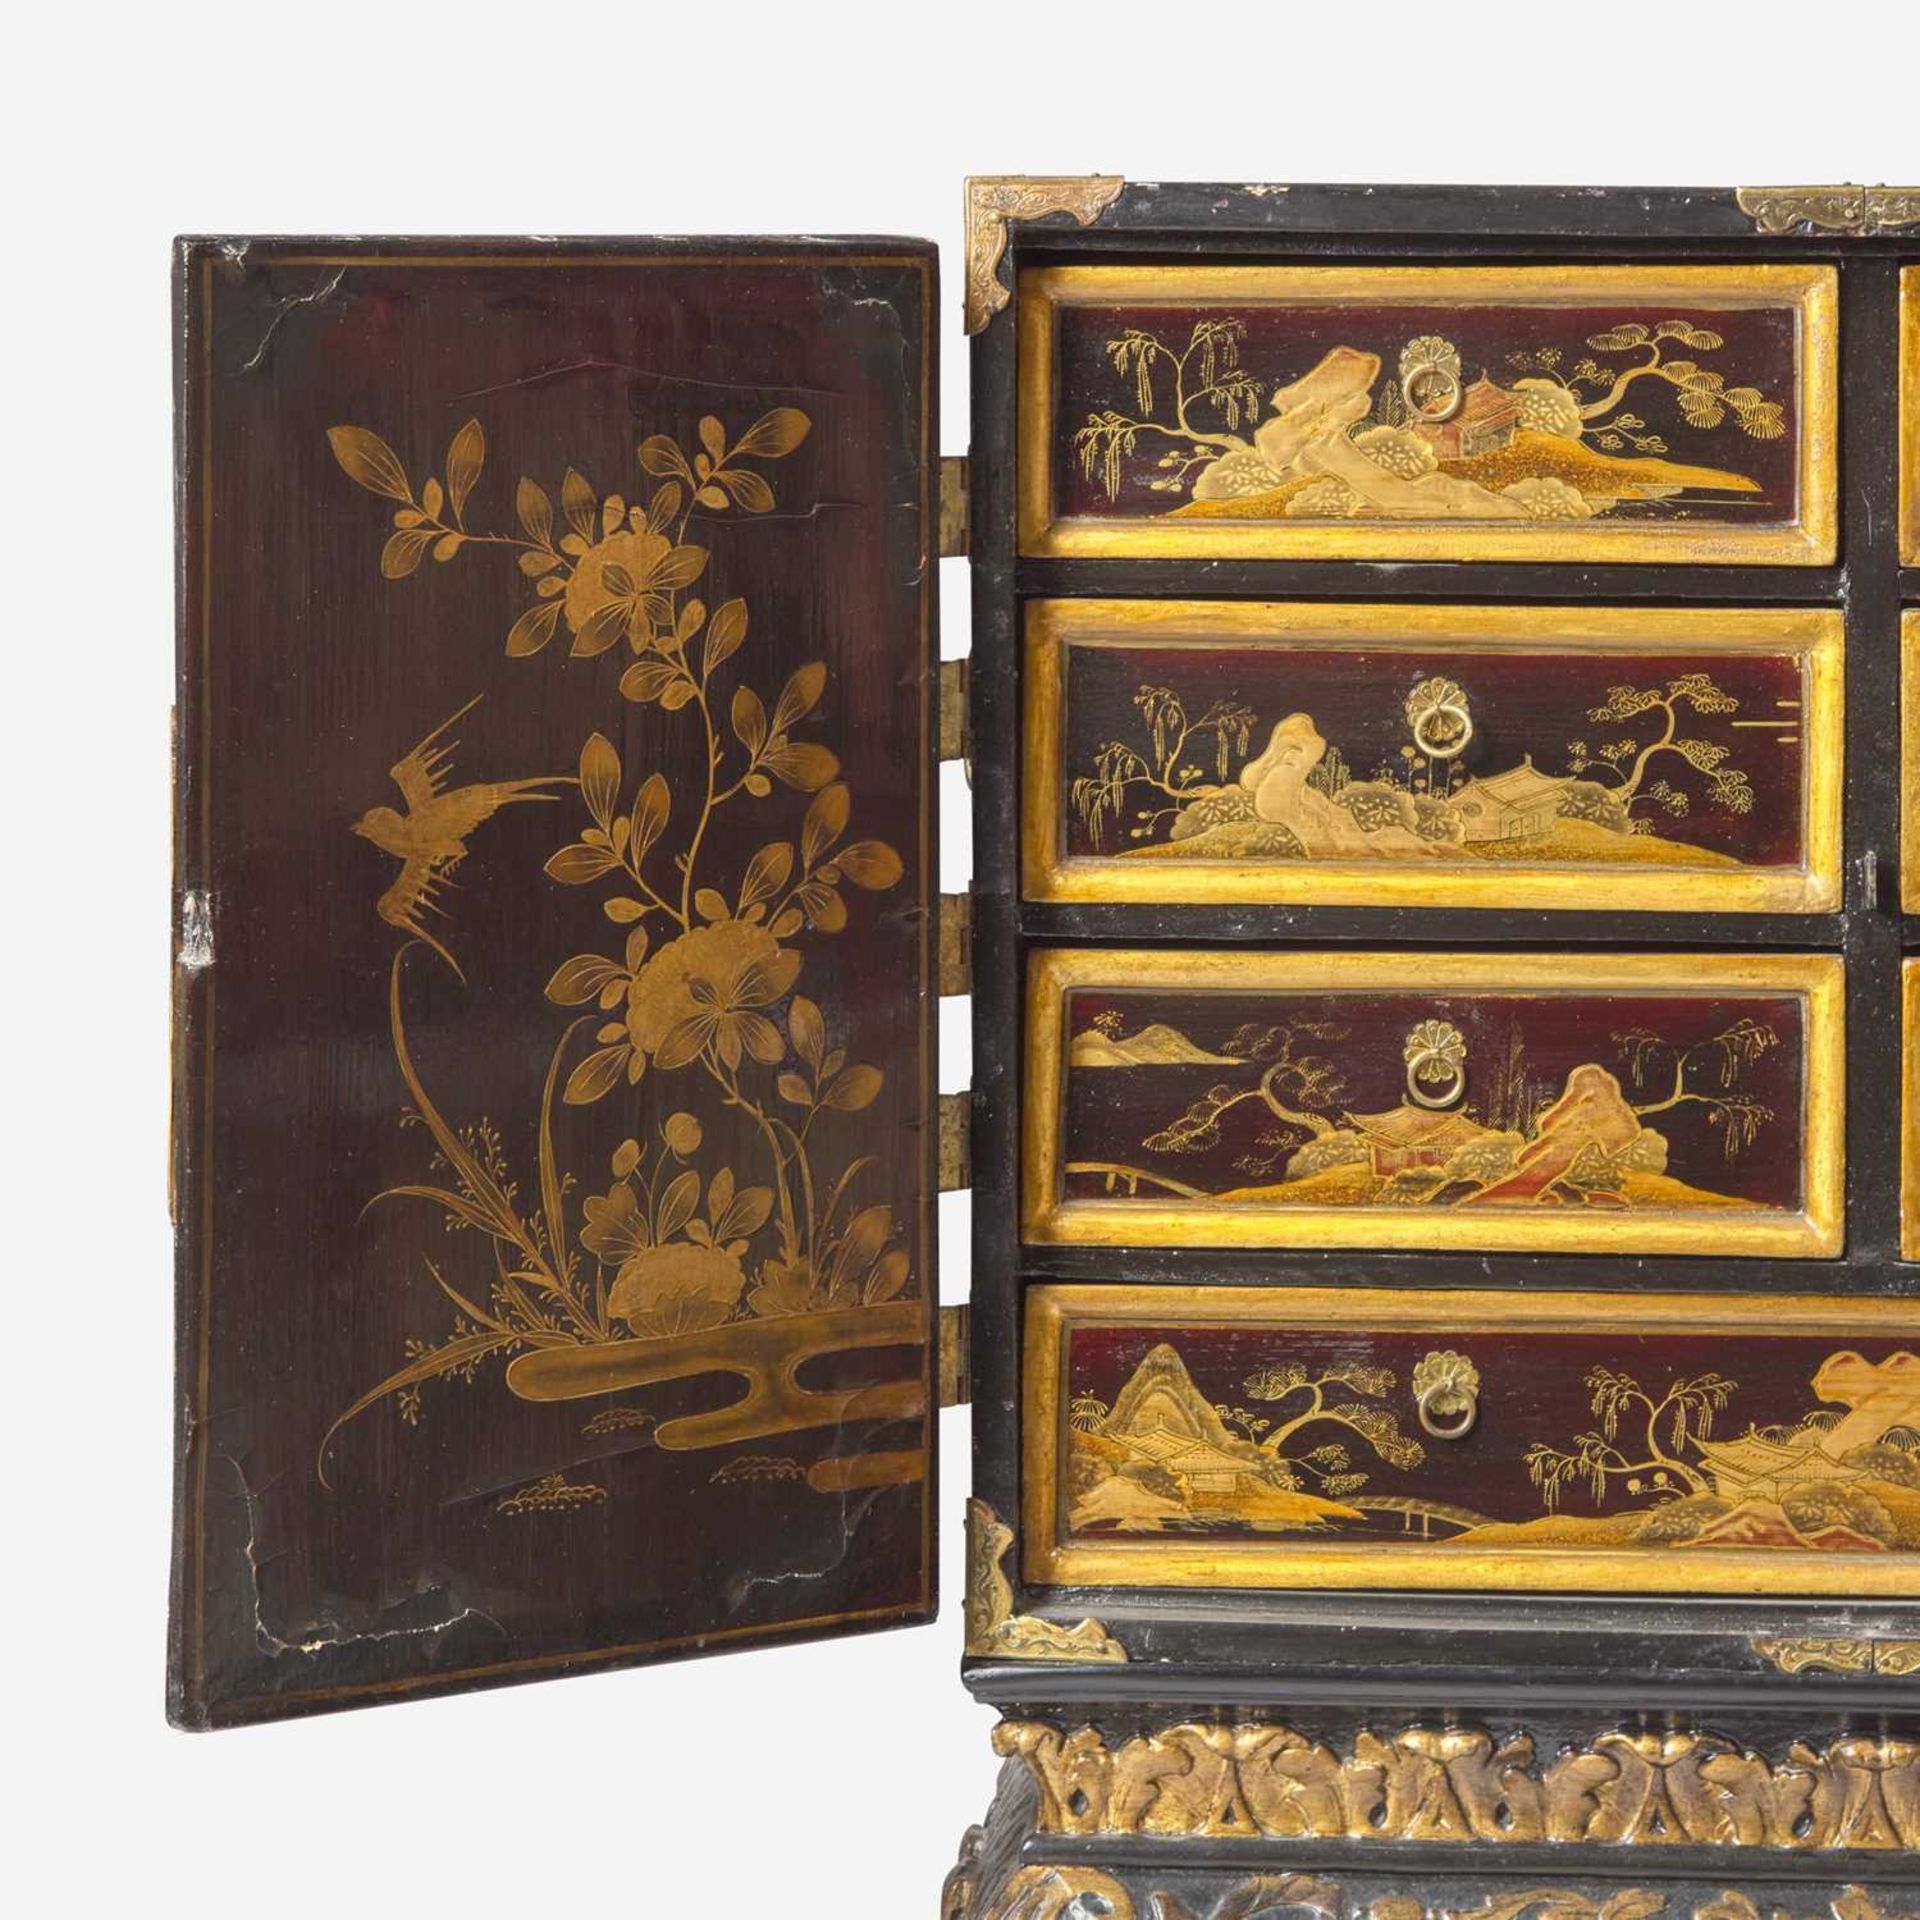 A Chinese Export gilt-decorated black lacquer table cabinet on a George I gilt-decorated and - Image 3 of 4